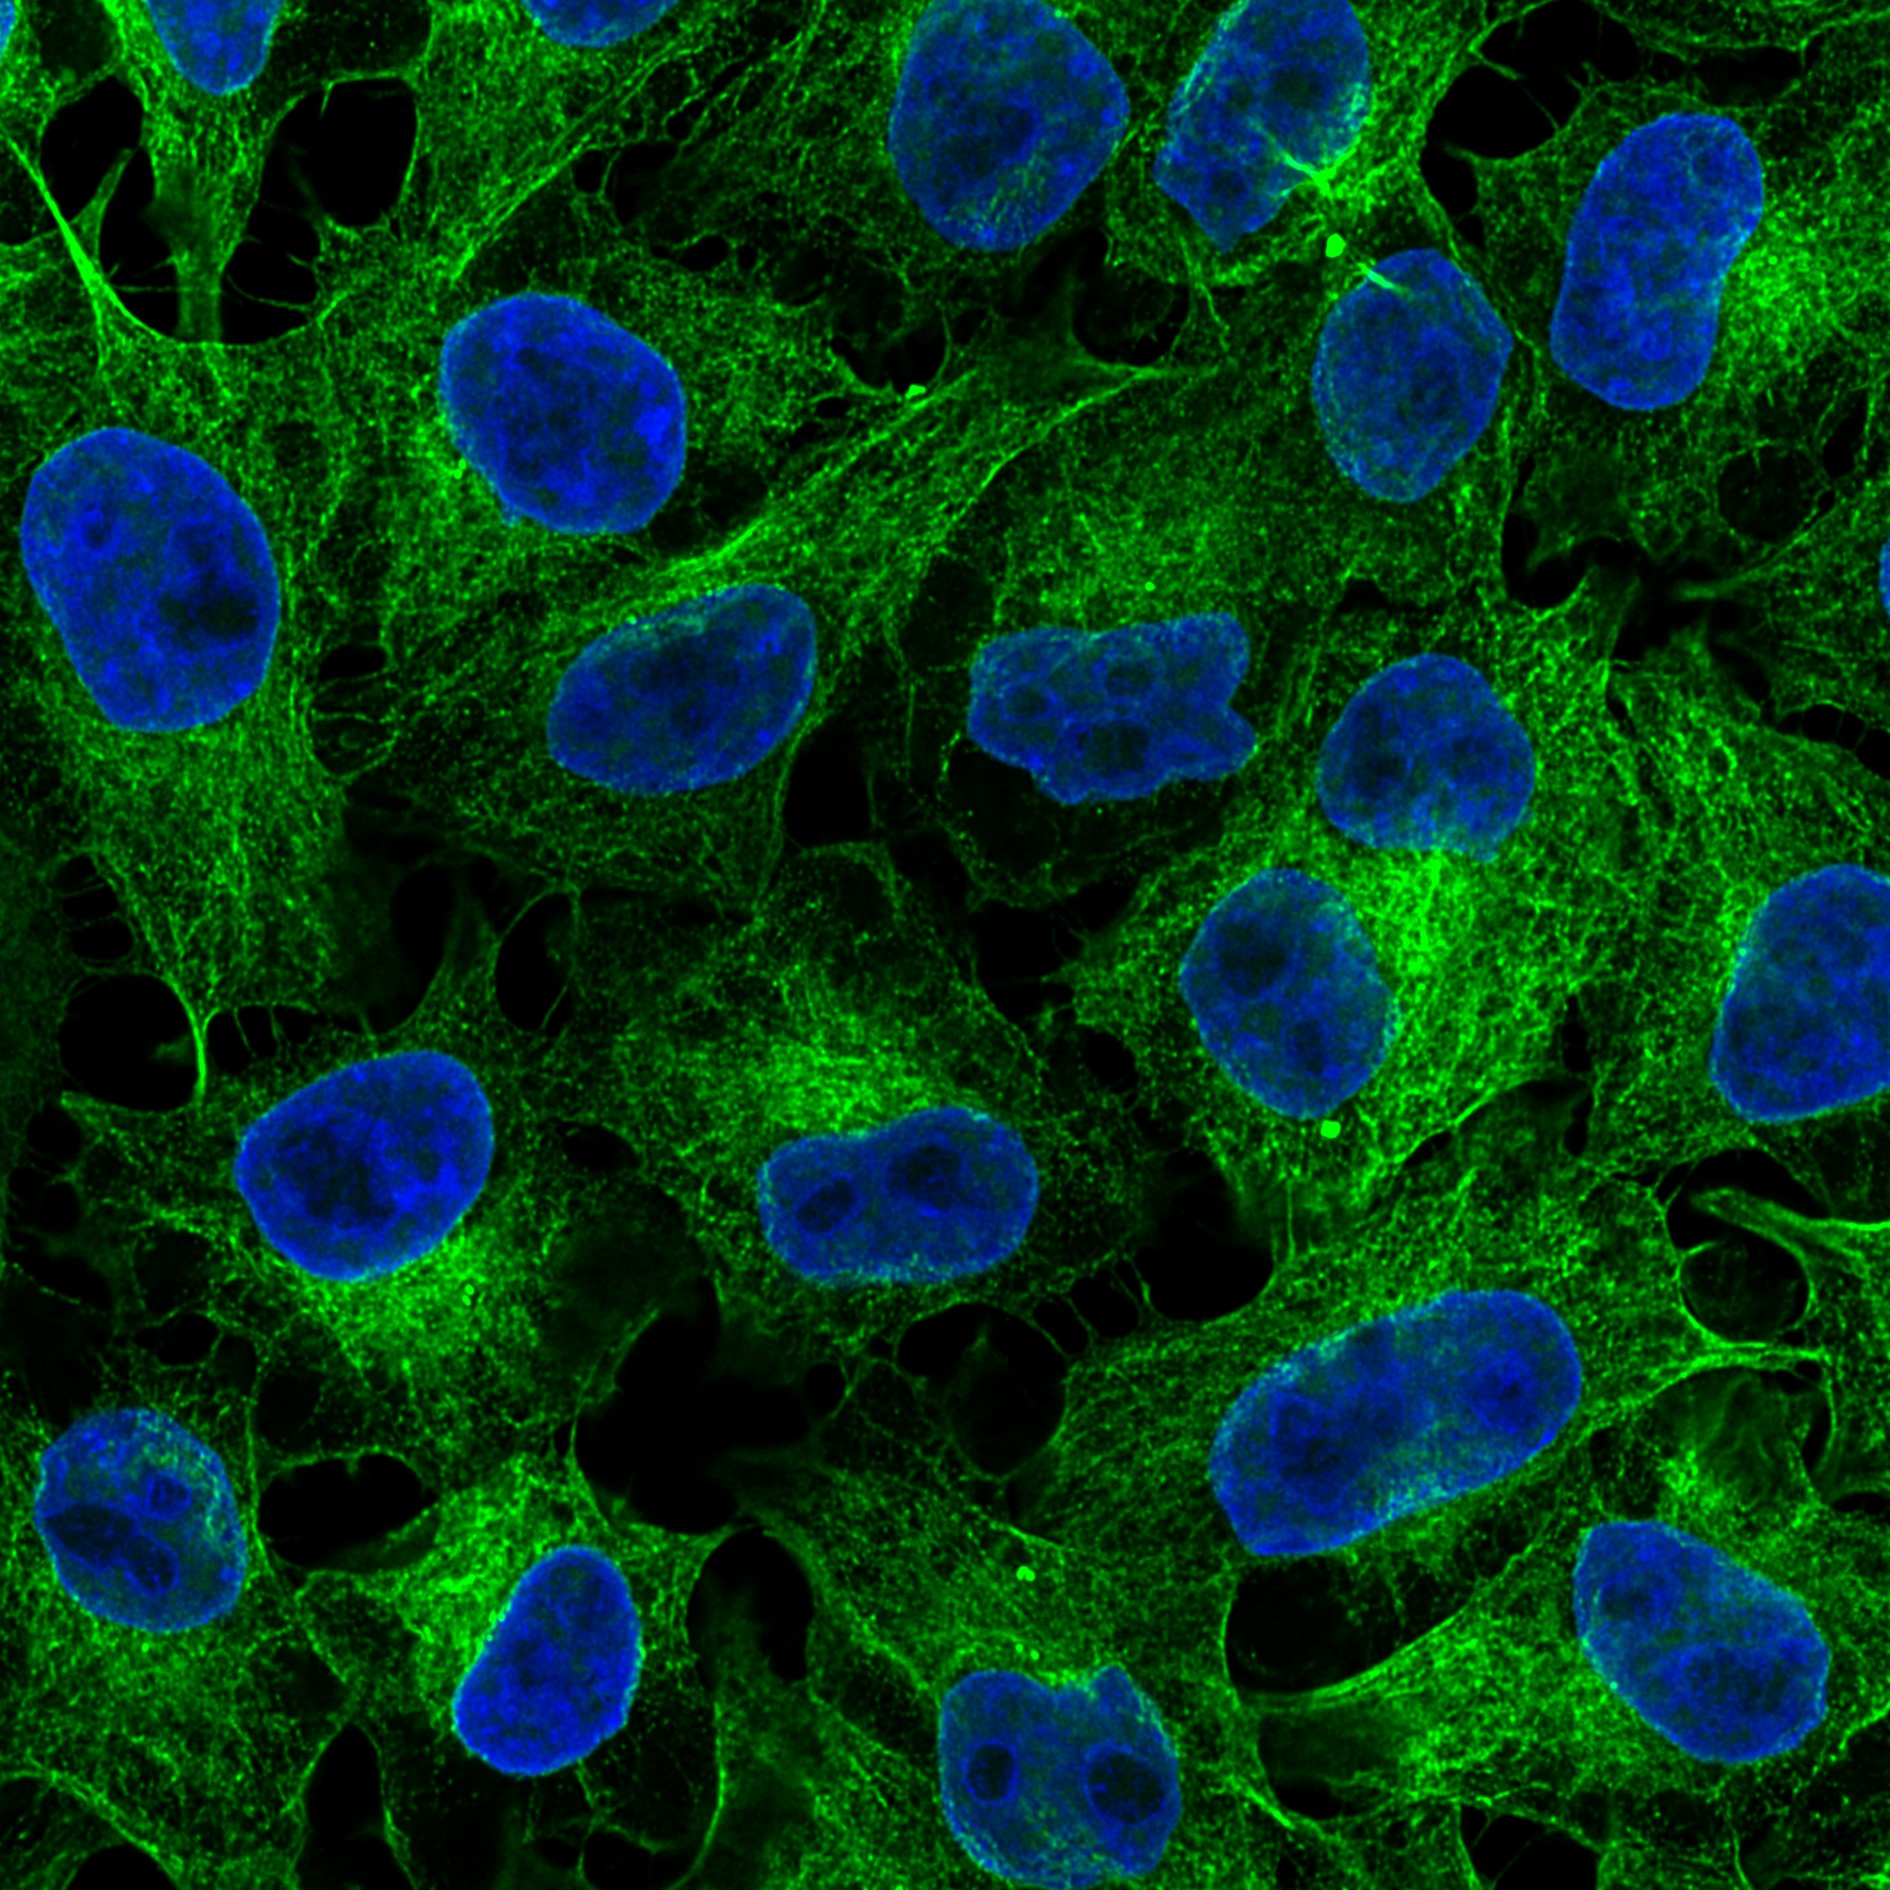 Immunofluorescence analysis of HeLa cells stained with mouse IgG2b anti-tubulin beta antibody and Nano-Secondary® alpaca anti-mouse IgG2b, recombinant VHH, CoraLite® Plus 488 (smsG2bCL488-1, green). Nuclei were stained with DAPI (blue). Images were recorded at the Core Facility Bioimaging at the Biomedical Center, LMU Munich.